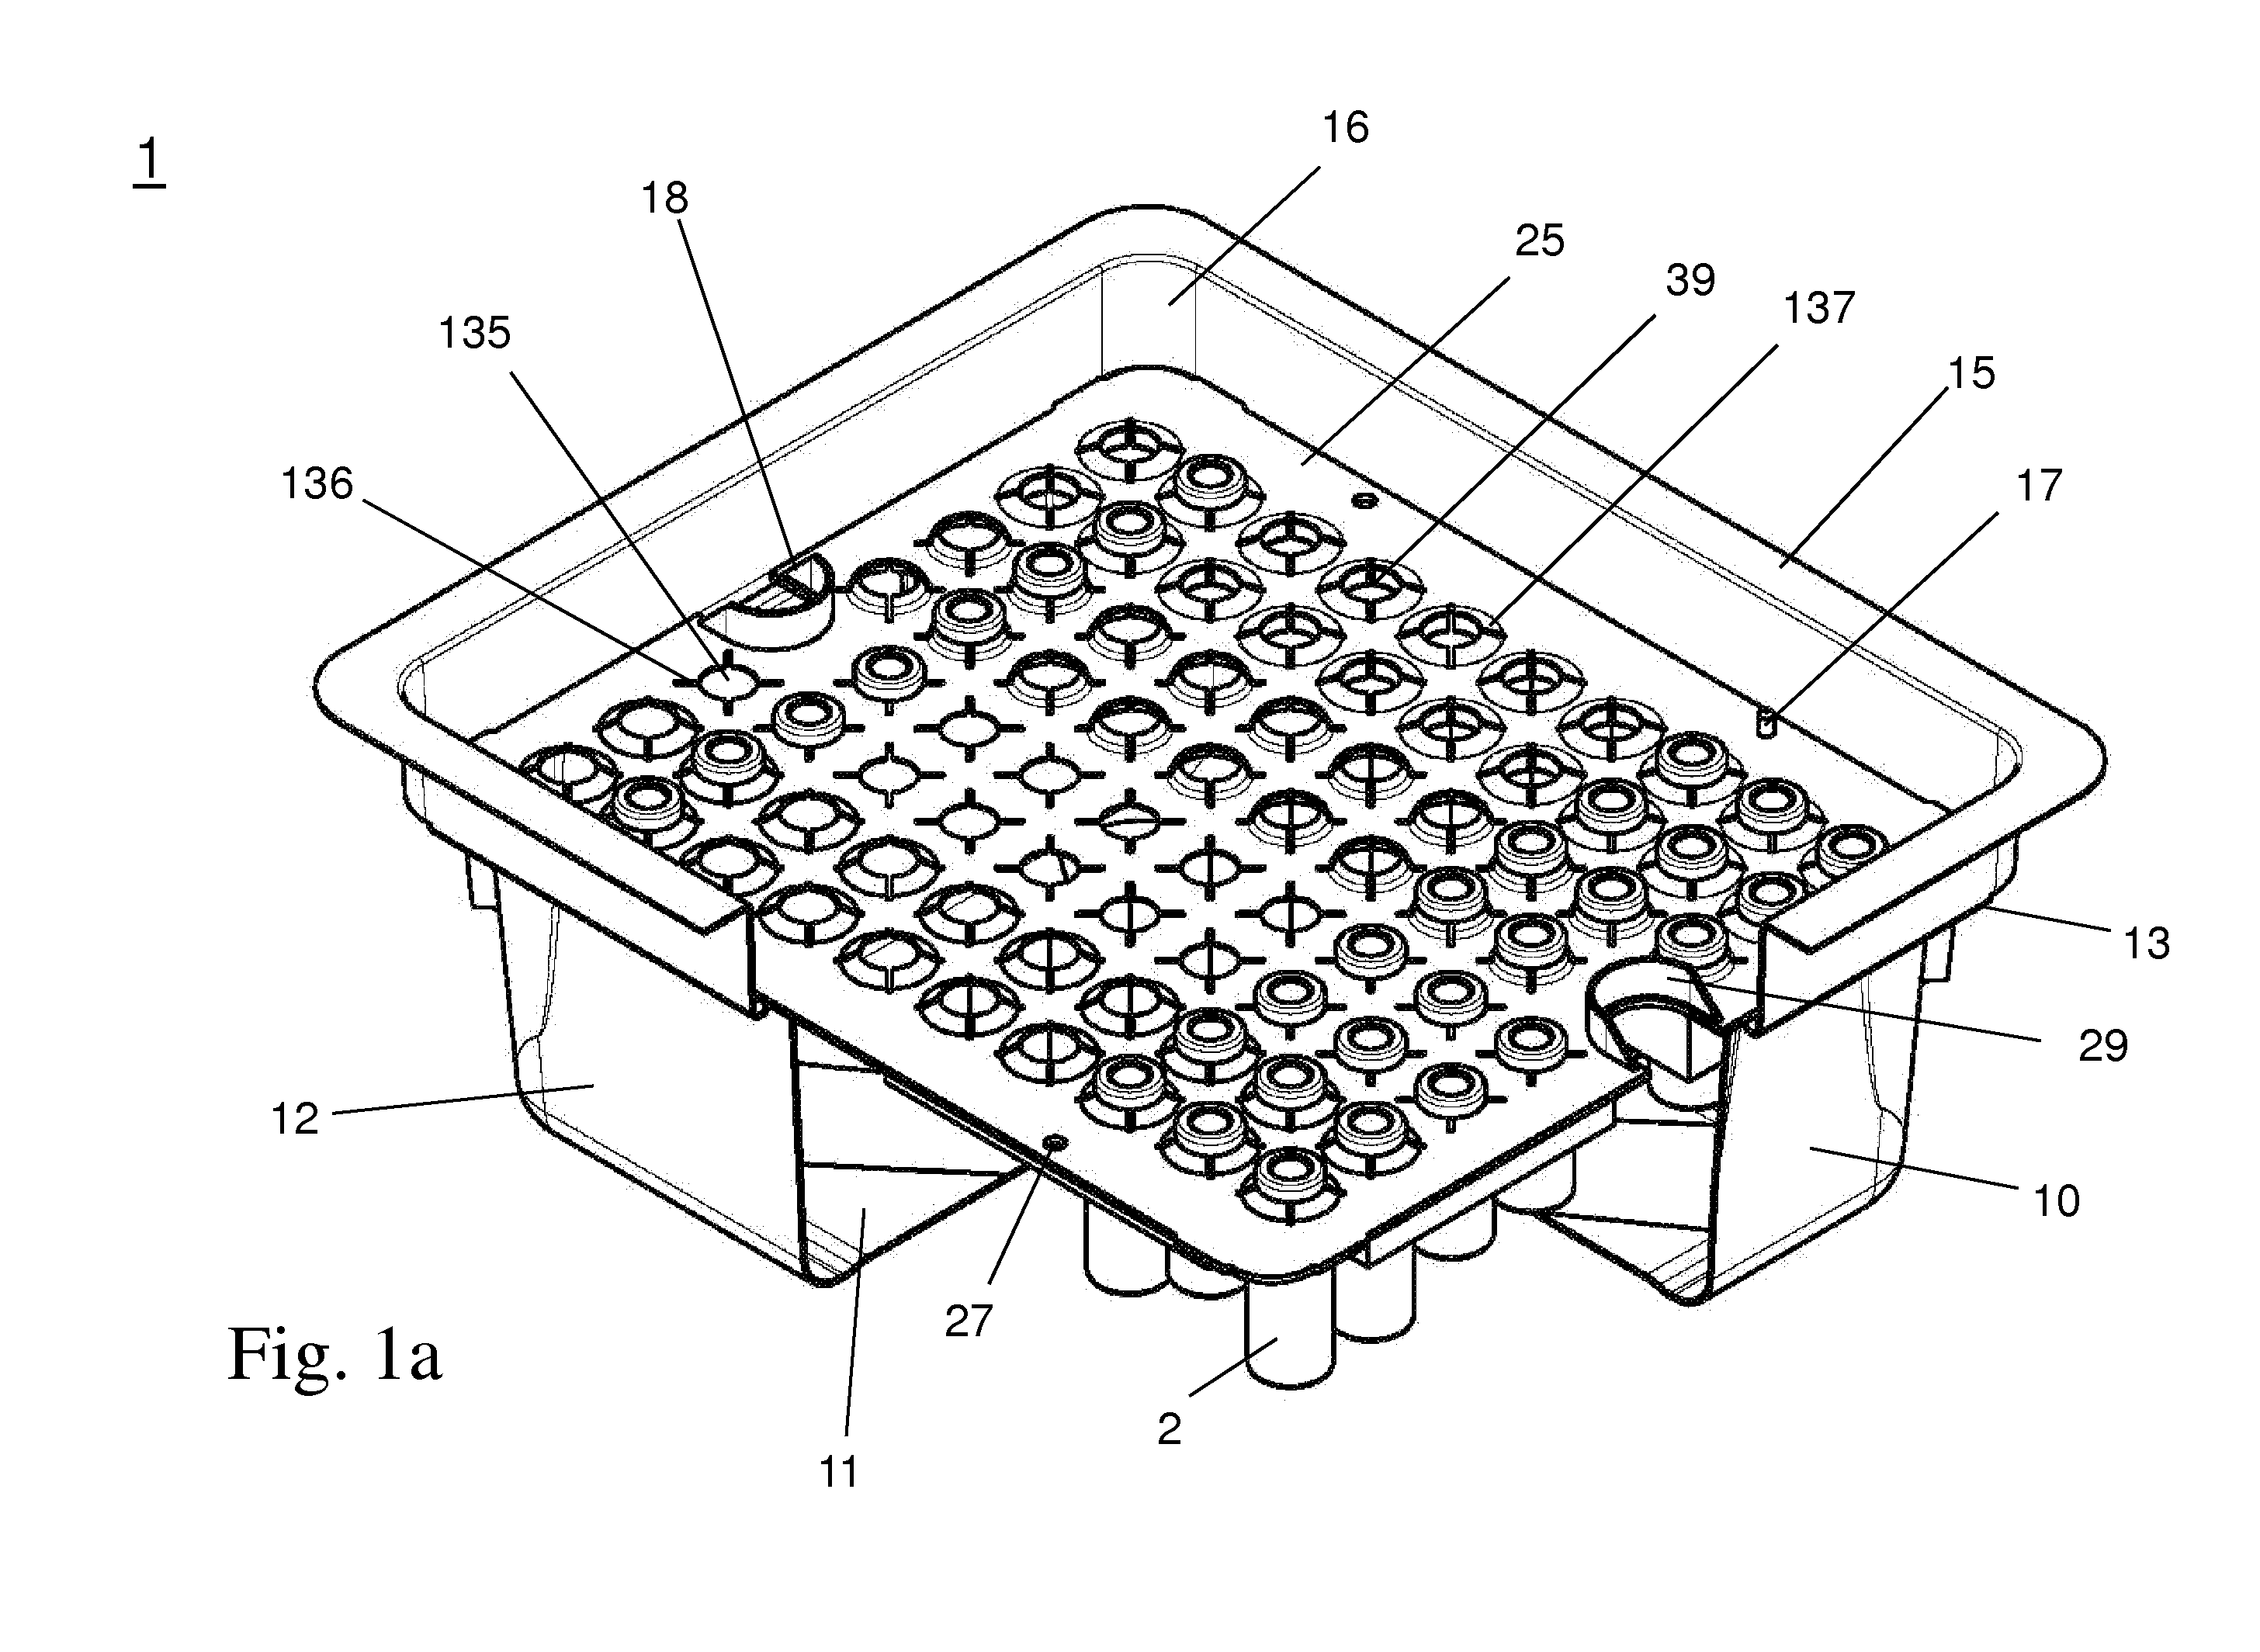 Holding structure for simultaneously holding a plurality of containers for medical, pharmaceutical or cosmetic applications and transport or packaging container with holding structure